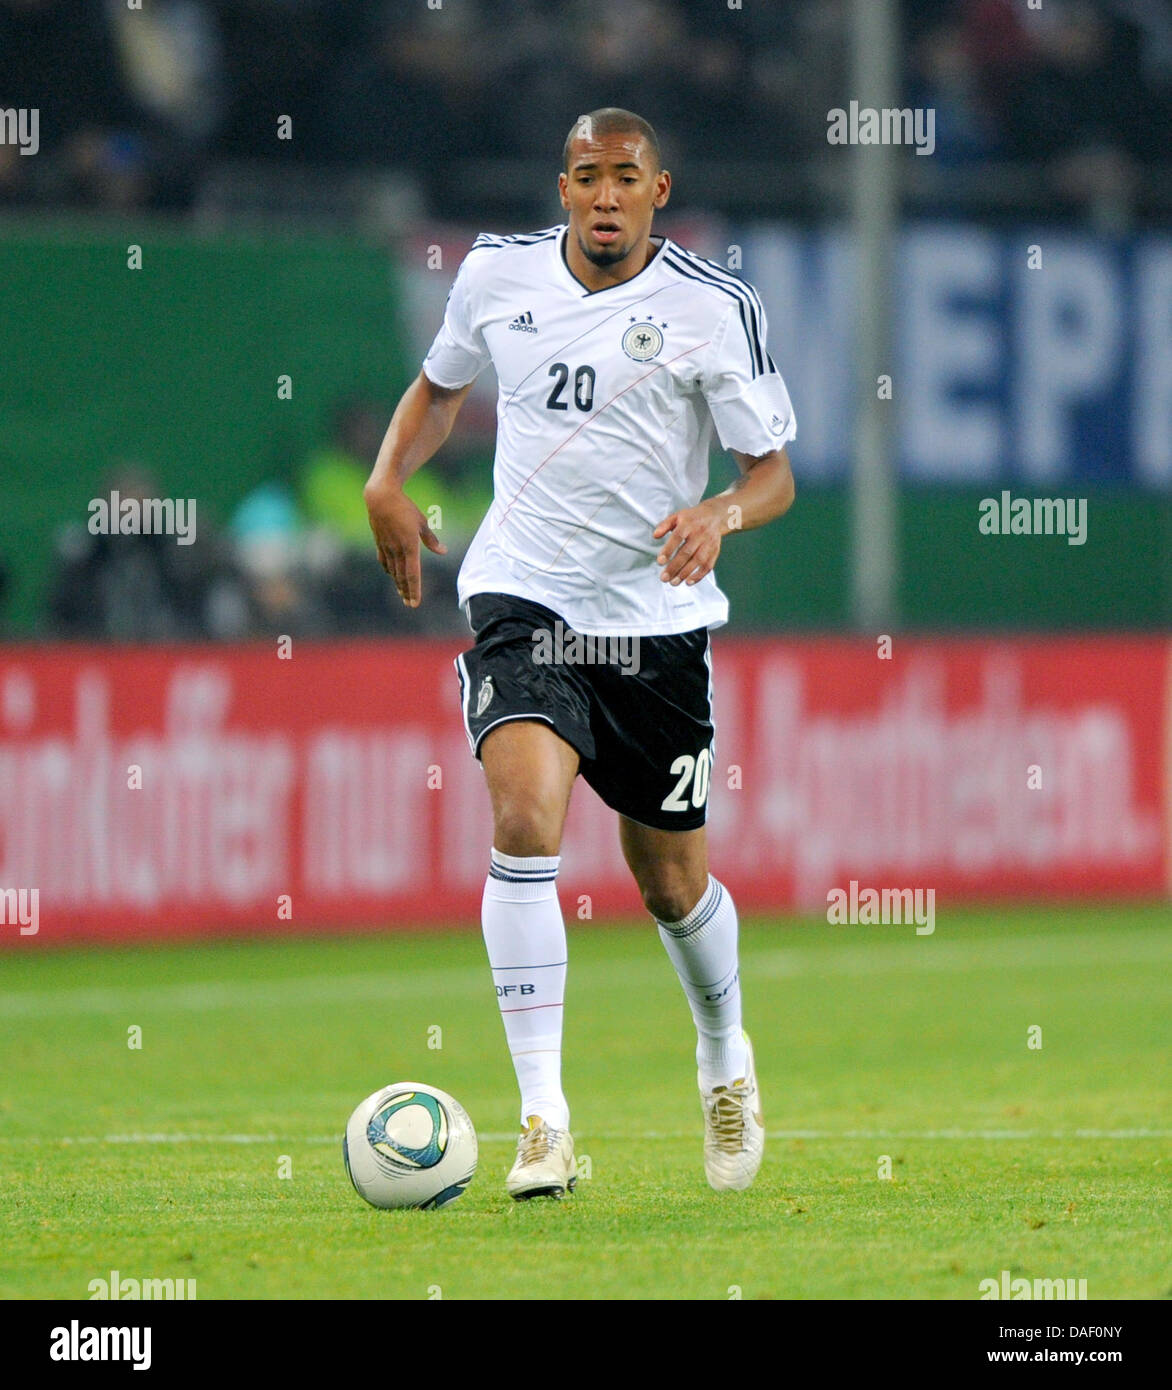 Germany's Jerome Boateng dribbles the ball during the national soccer friendly match Germany vs Netherlands at Imtech Arena in Hamburg, Germany, 15 November 2011. Photo: Thomas Eisenhuth Stock Photo